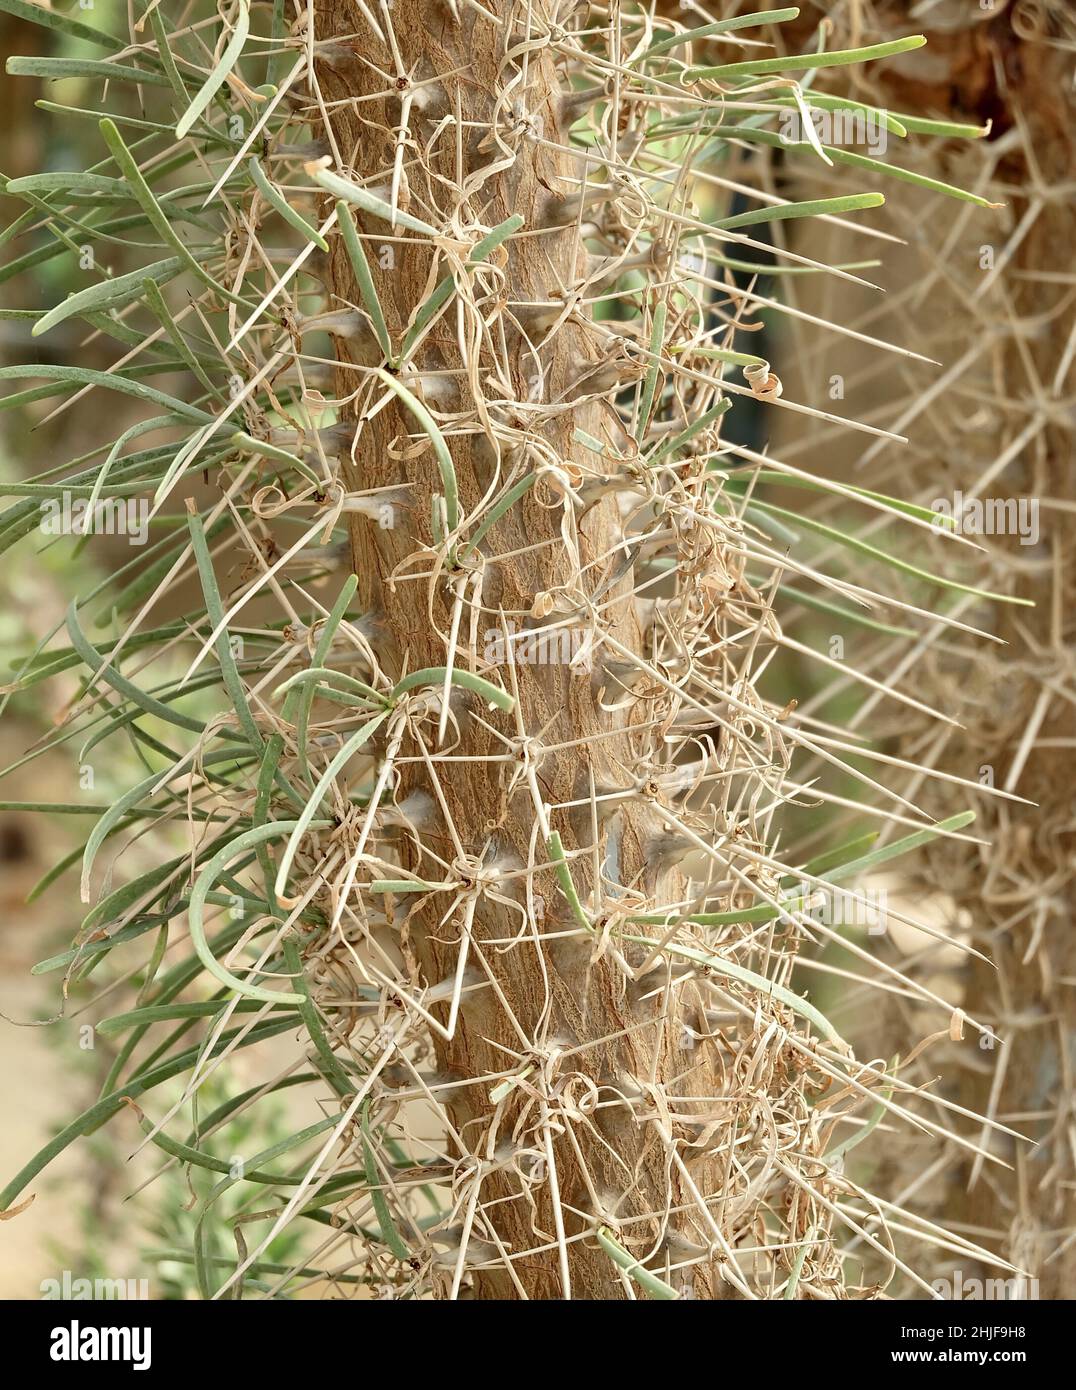 Garden and Plant, Closeup of Austrocylindropuntia Subulata, Eve's Pin or Eve's Needle Cactus in The Garden. A Succulent Plants with Sharp Thorns. Stock Photo